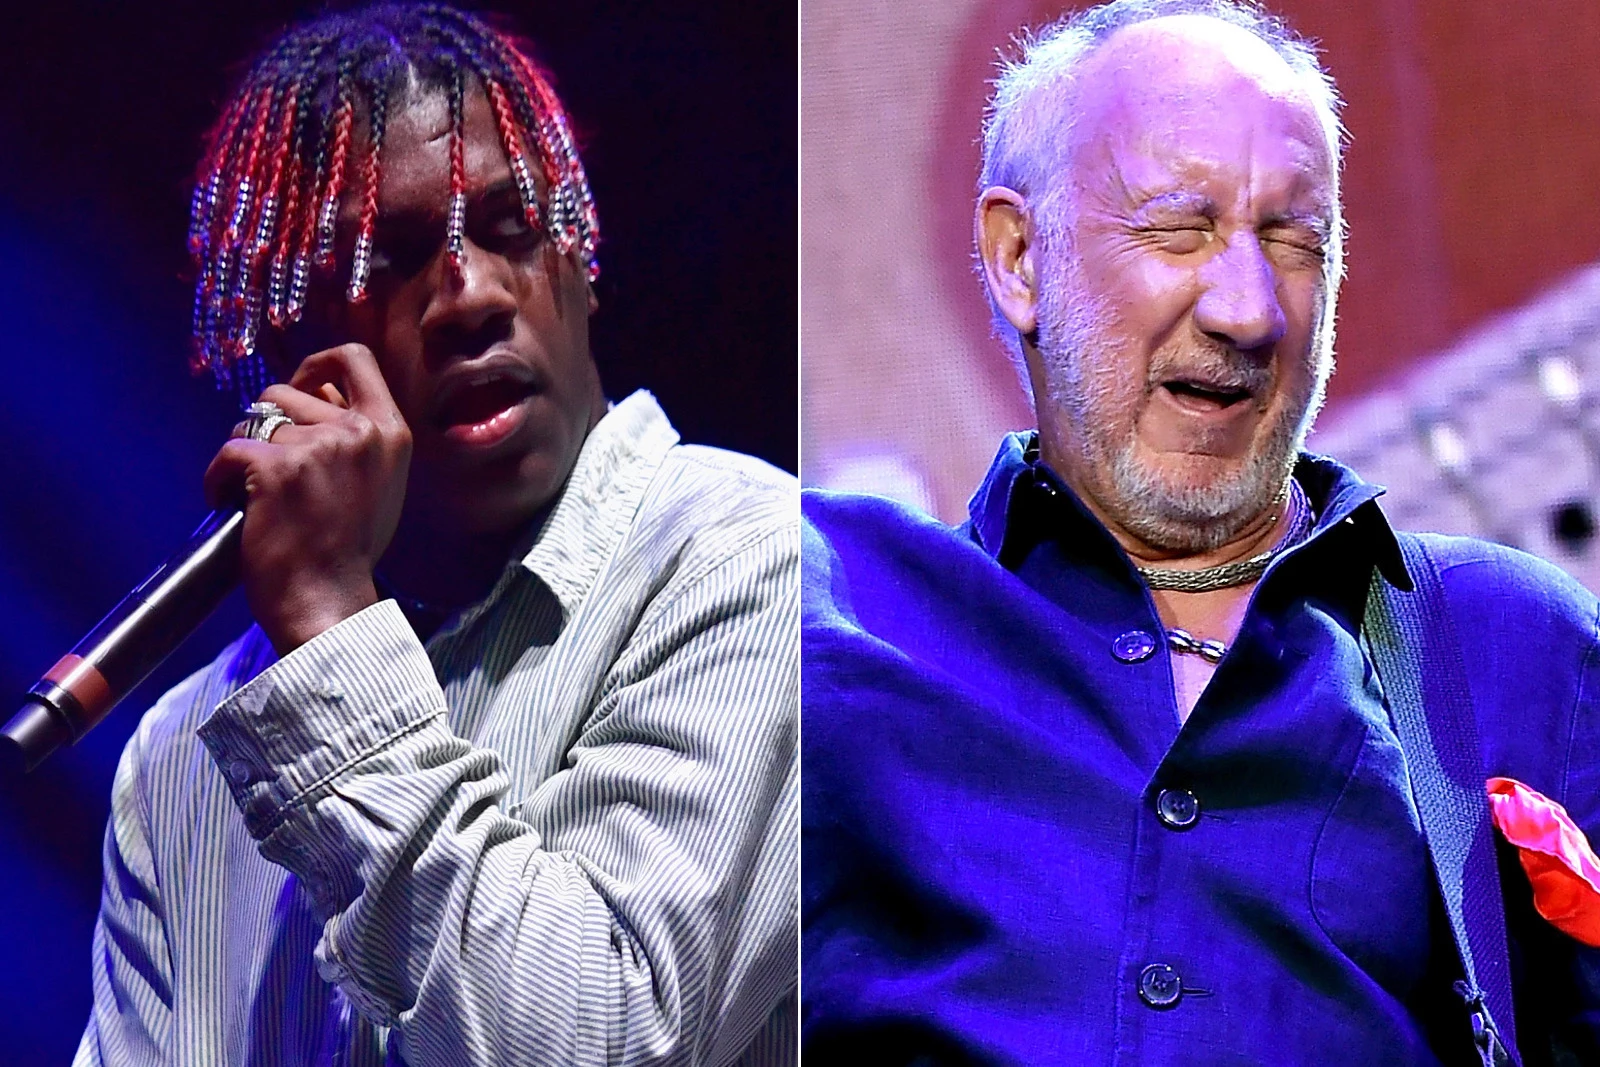 Listen to Lil Yachty Rap Over the Who's 'Baba O'Riley'